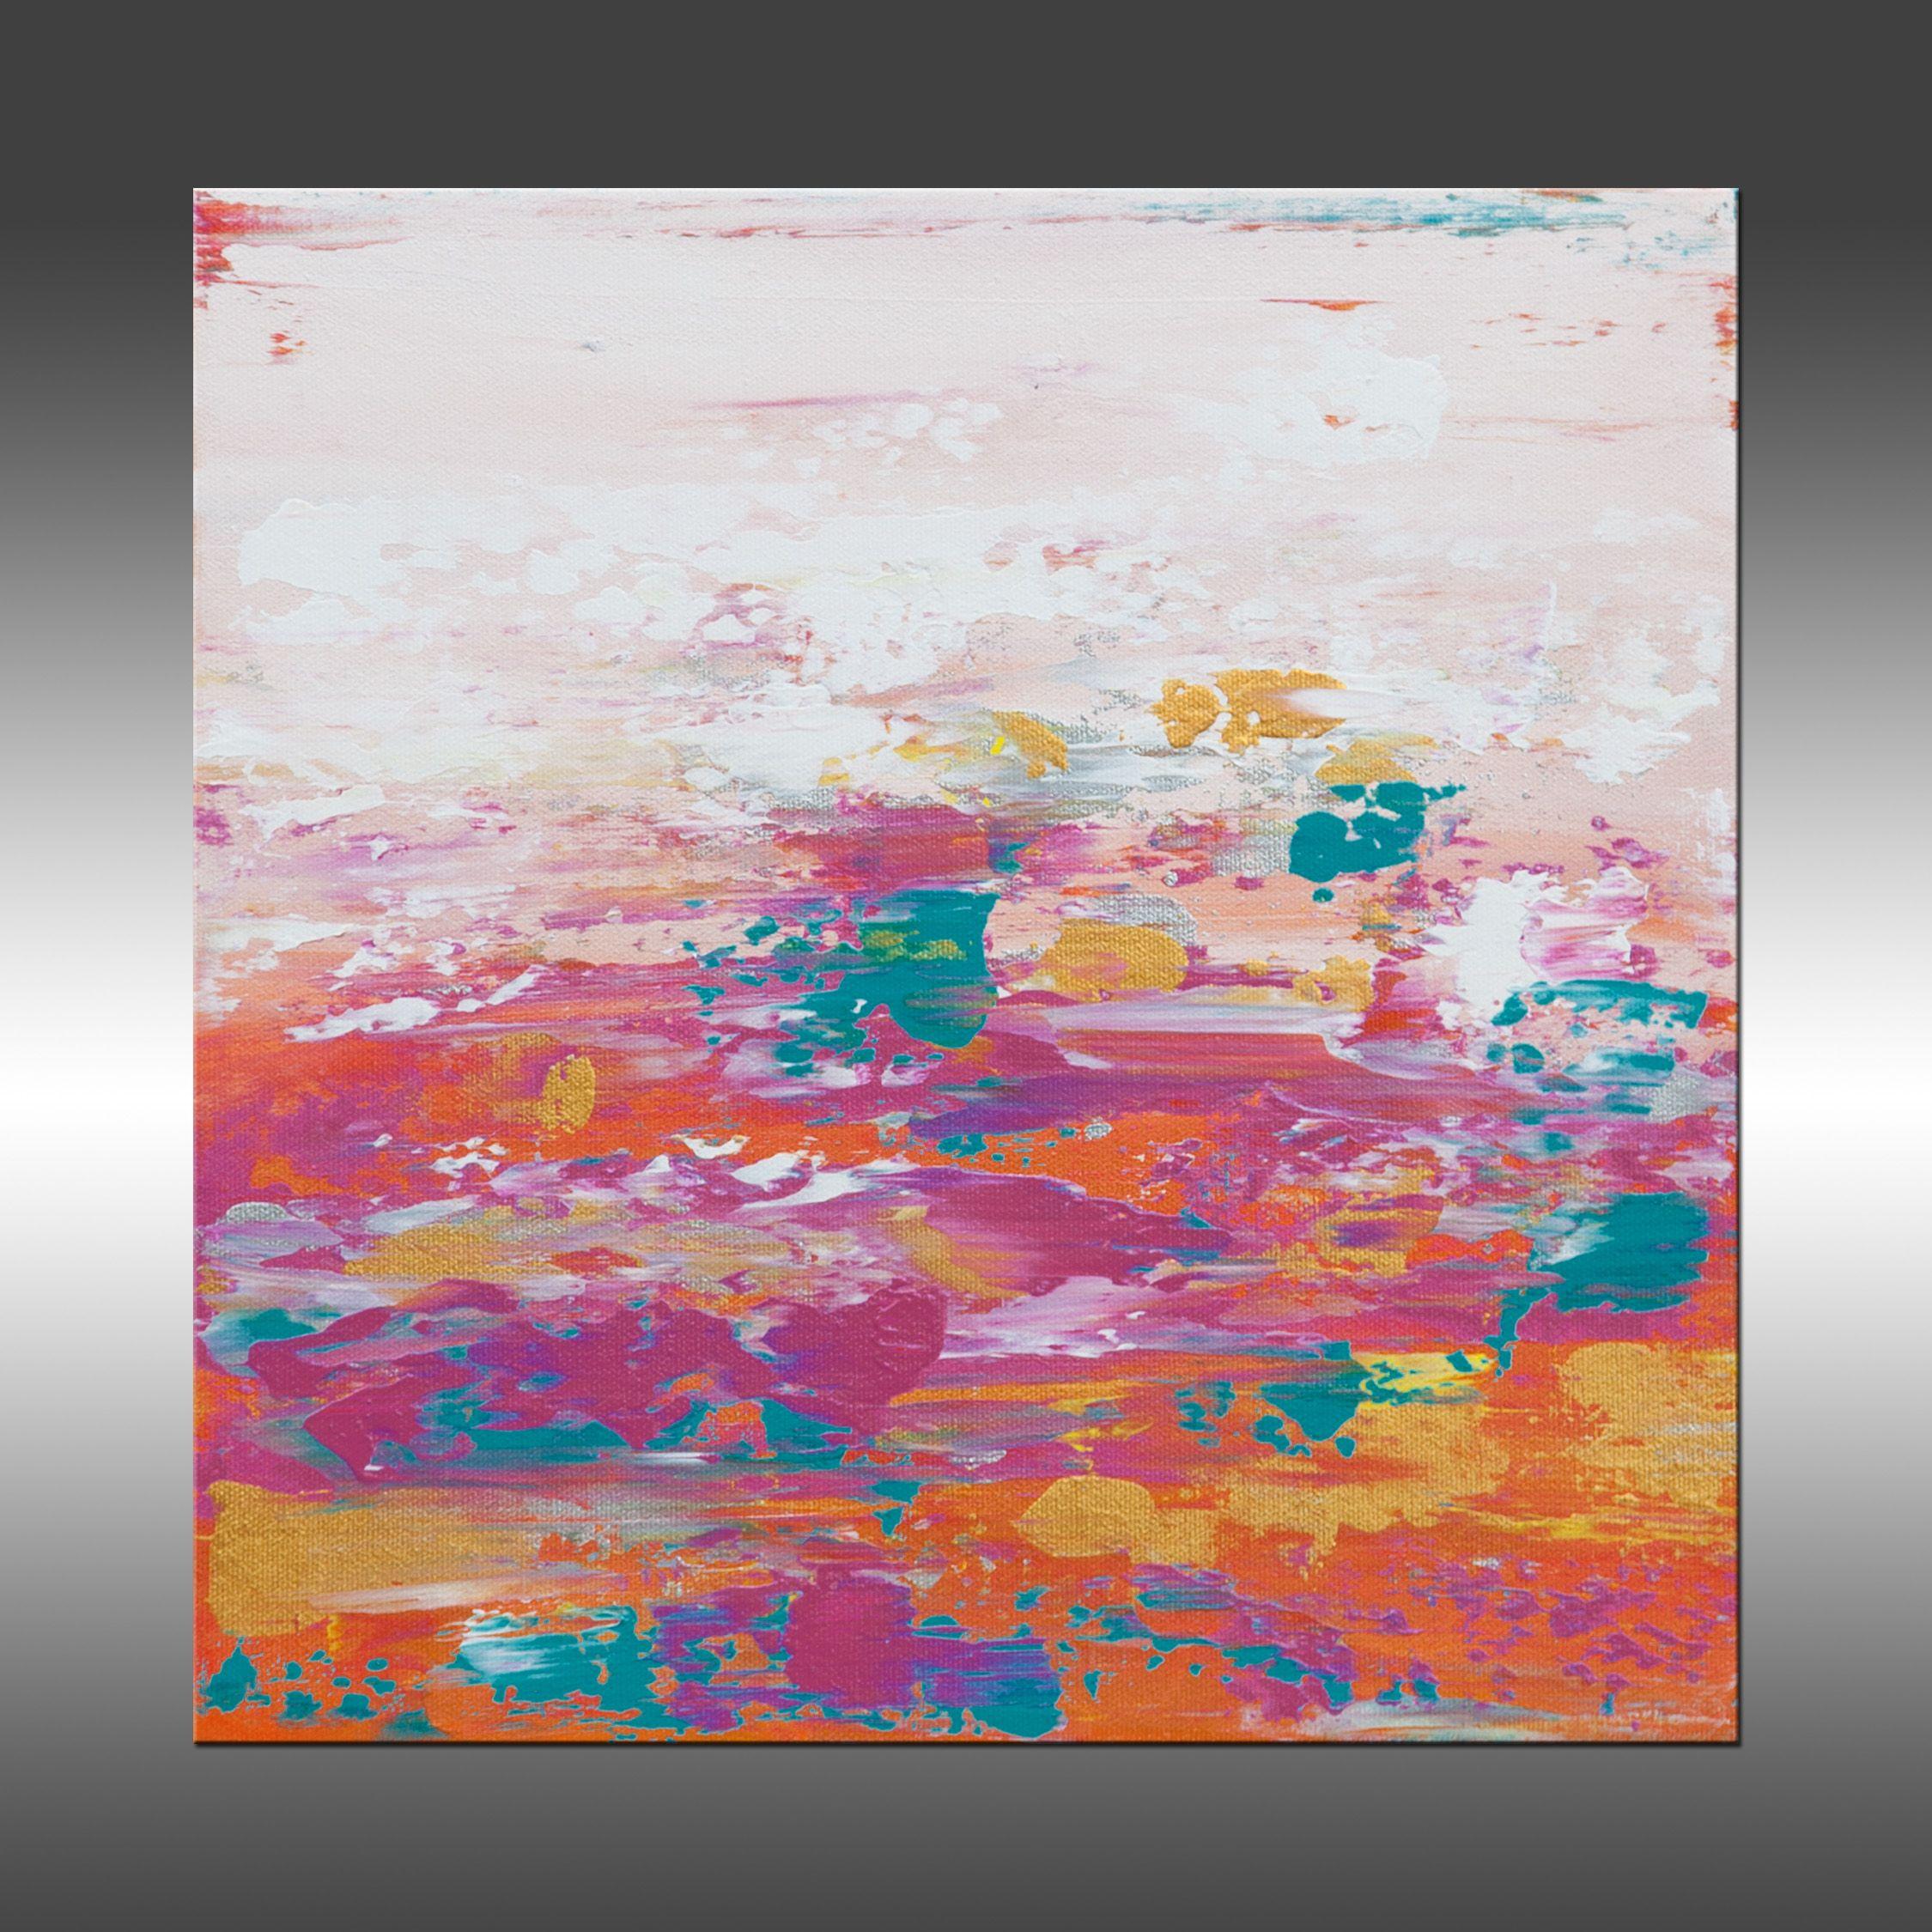 Modern Industrial 40 is an original painting, created with acrylic paint on gallery-wrapped canvas. It has a width of 12 inches and a height of 12 inches with a depth of 1.5 inches (12x12x1.5).     The colors used in the painting are white, pink,